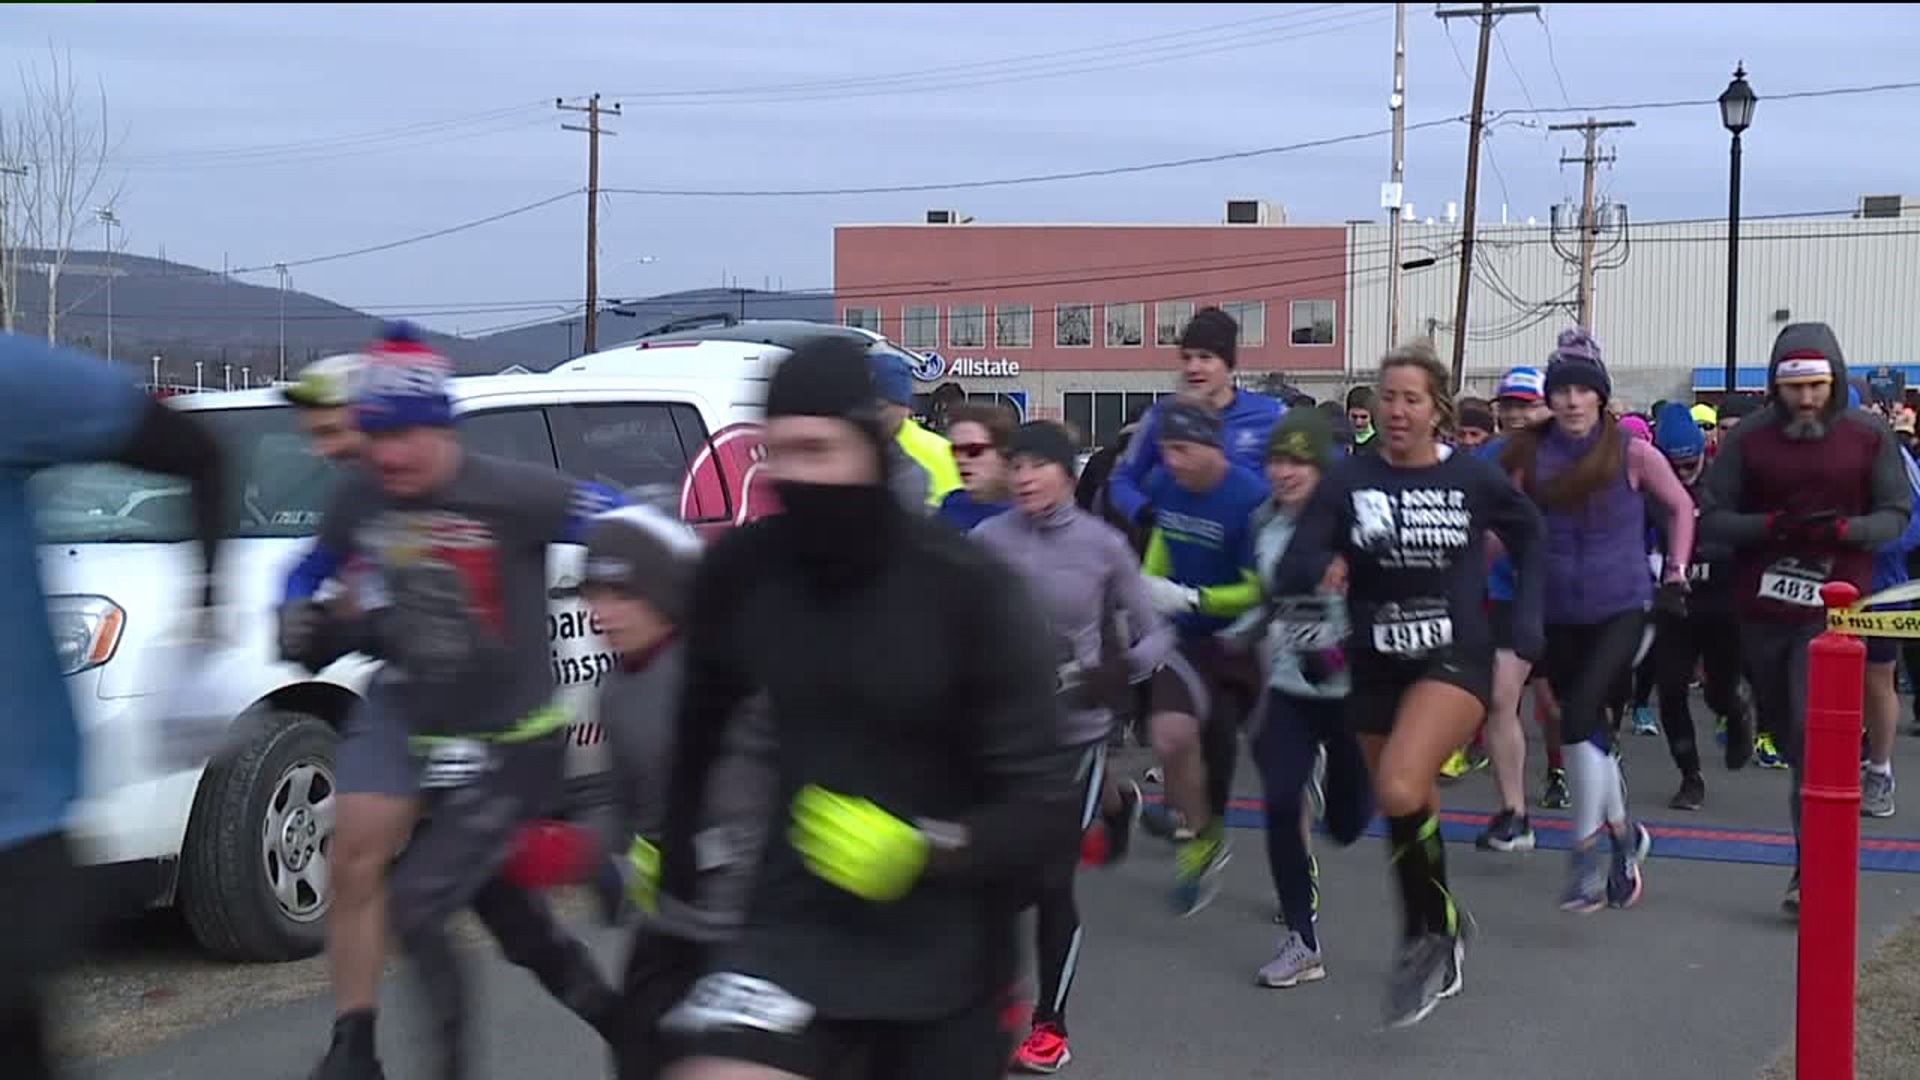 Runners 'Shiver by the River' in Scranton